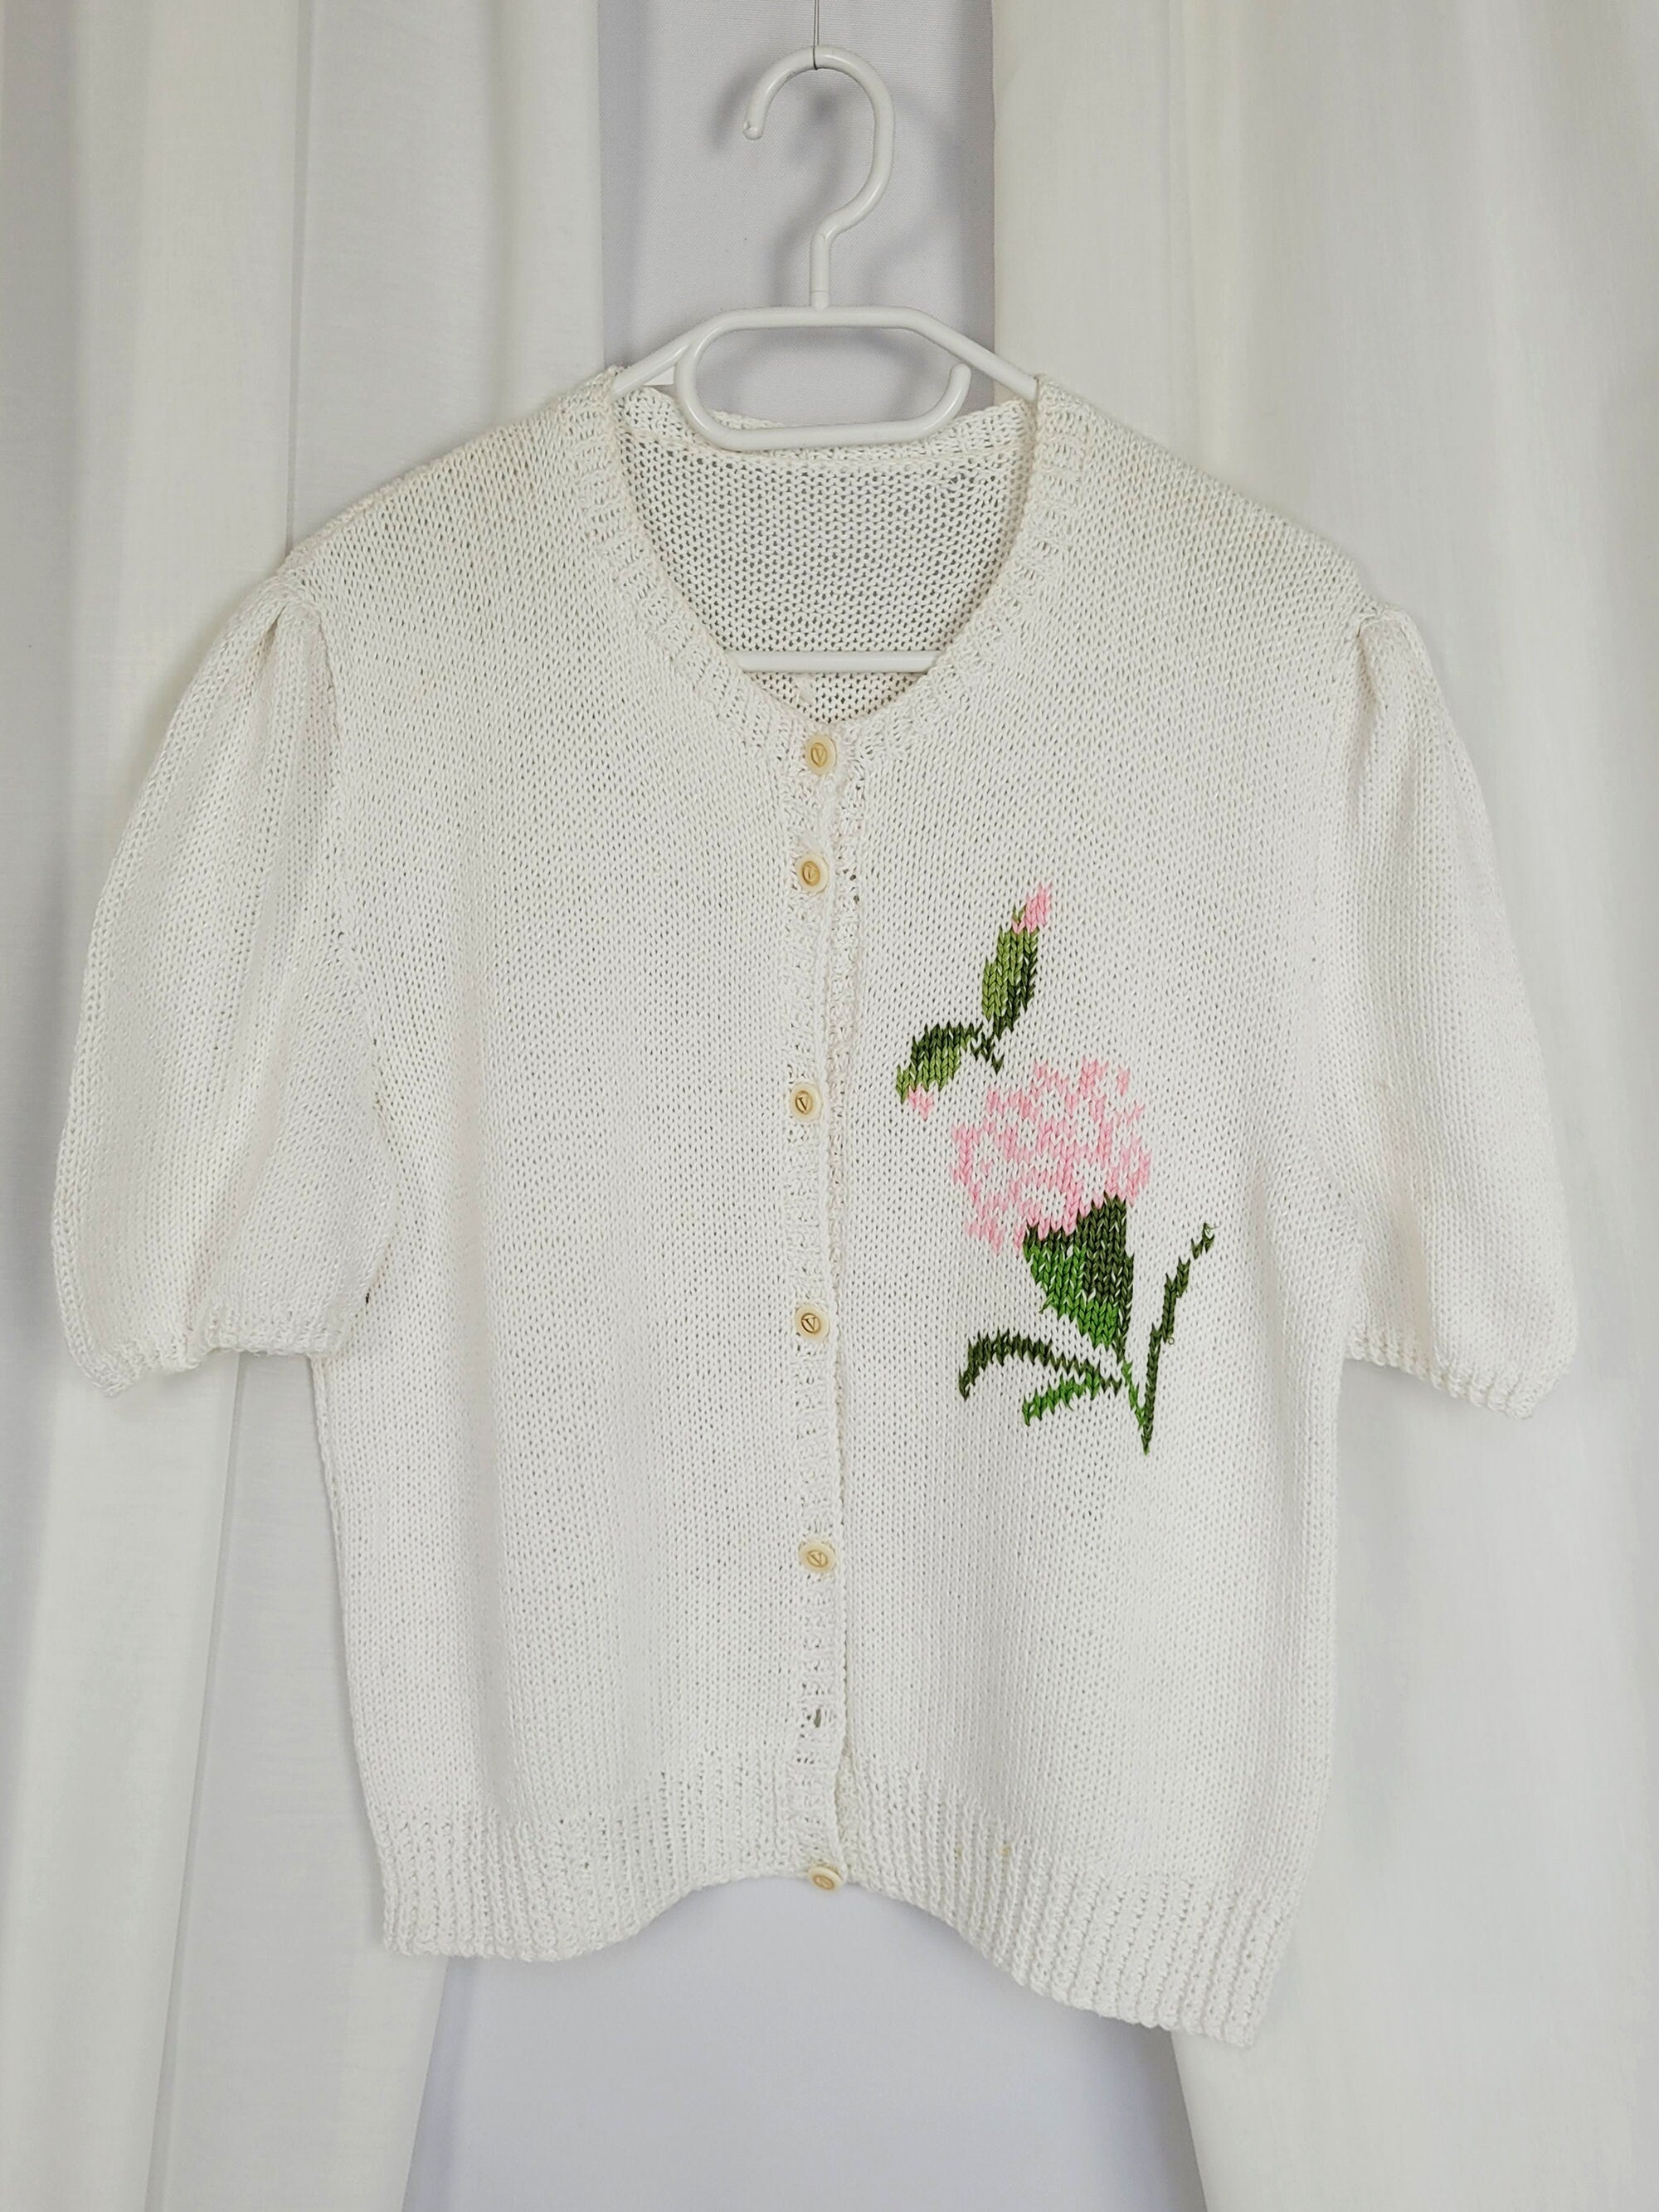 80s minimalist handmade flower cable knit white blouse top